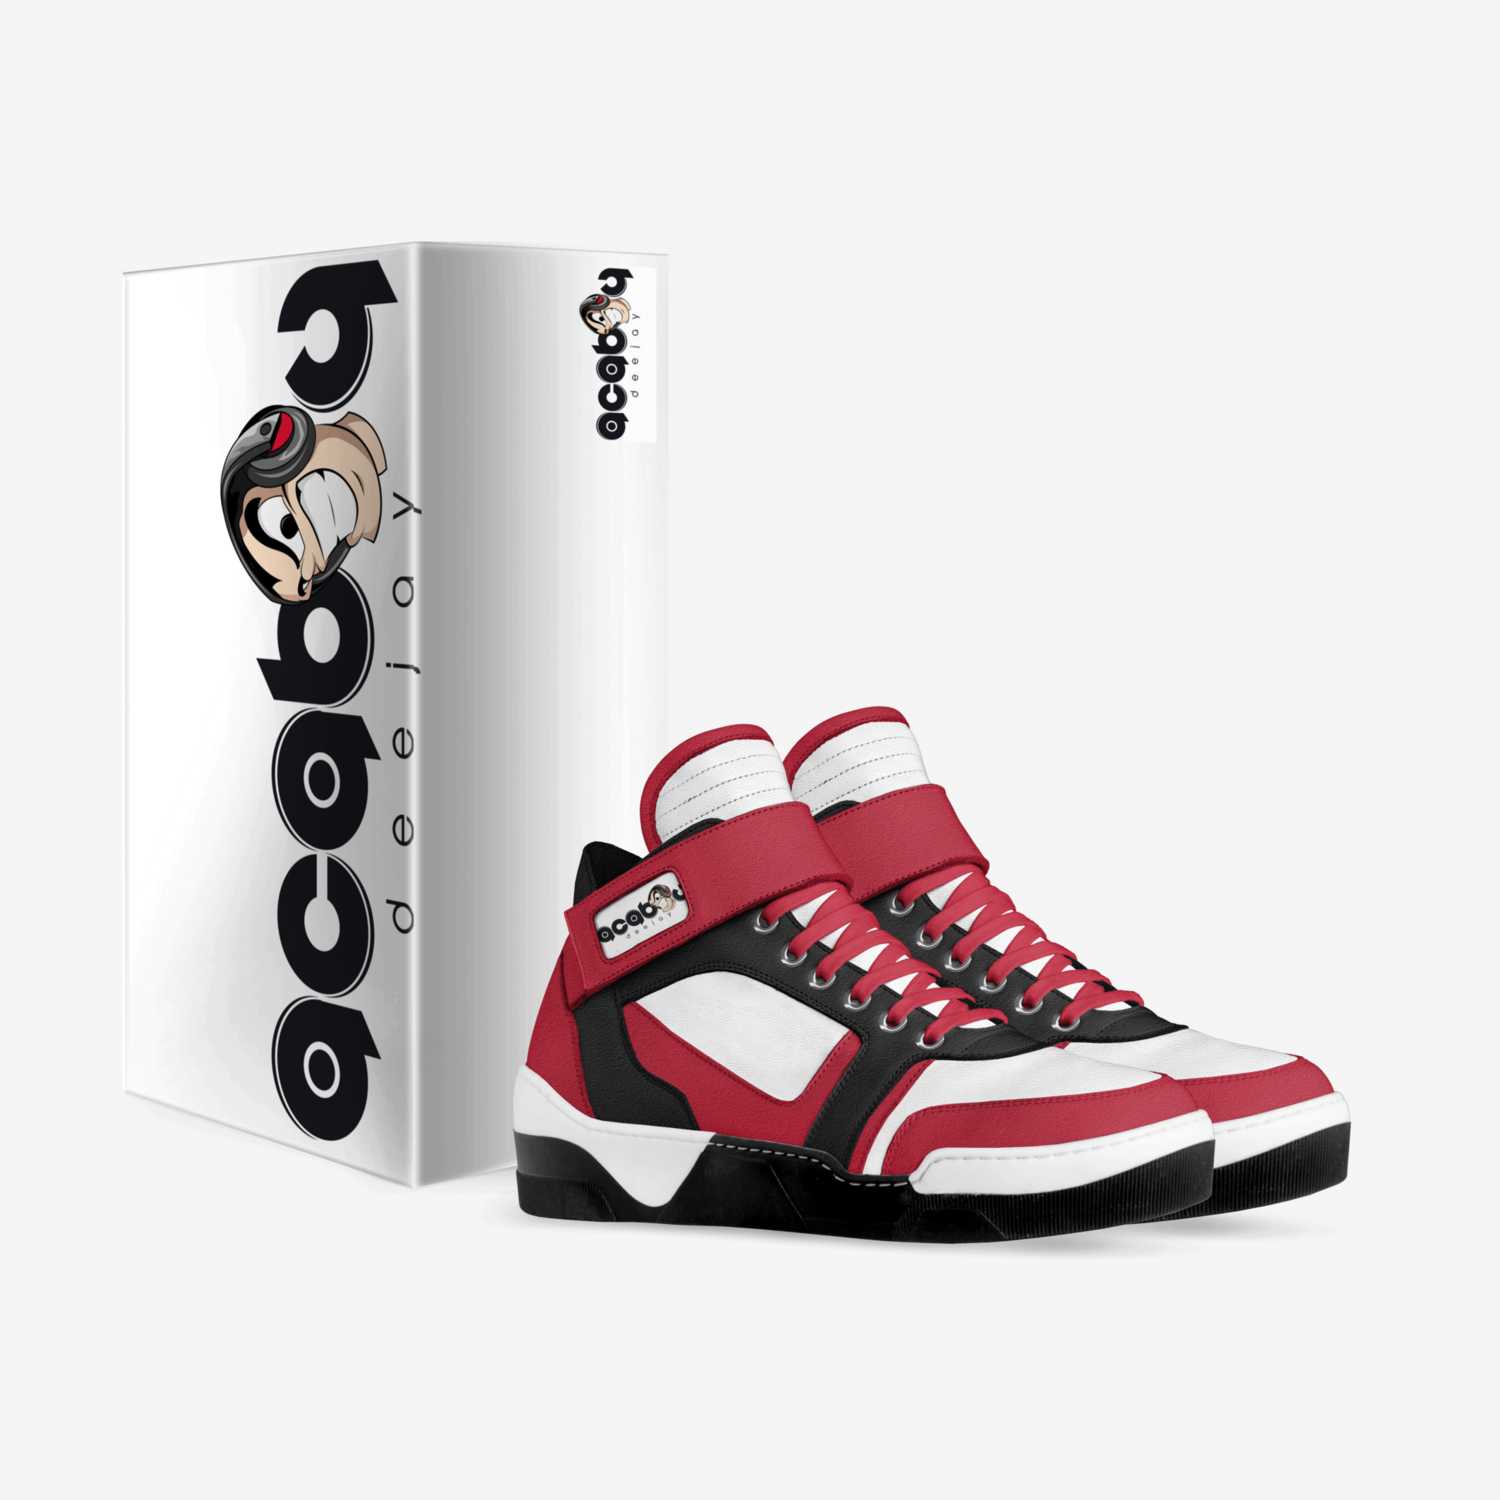 deejay acaboy custom made in Italy shoes by Jose Iturbe | Box view